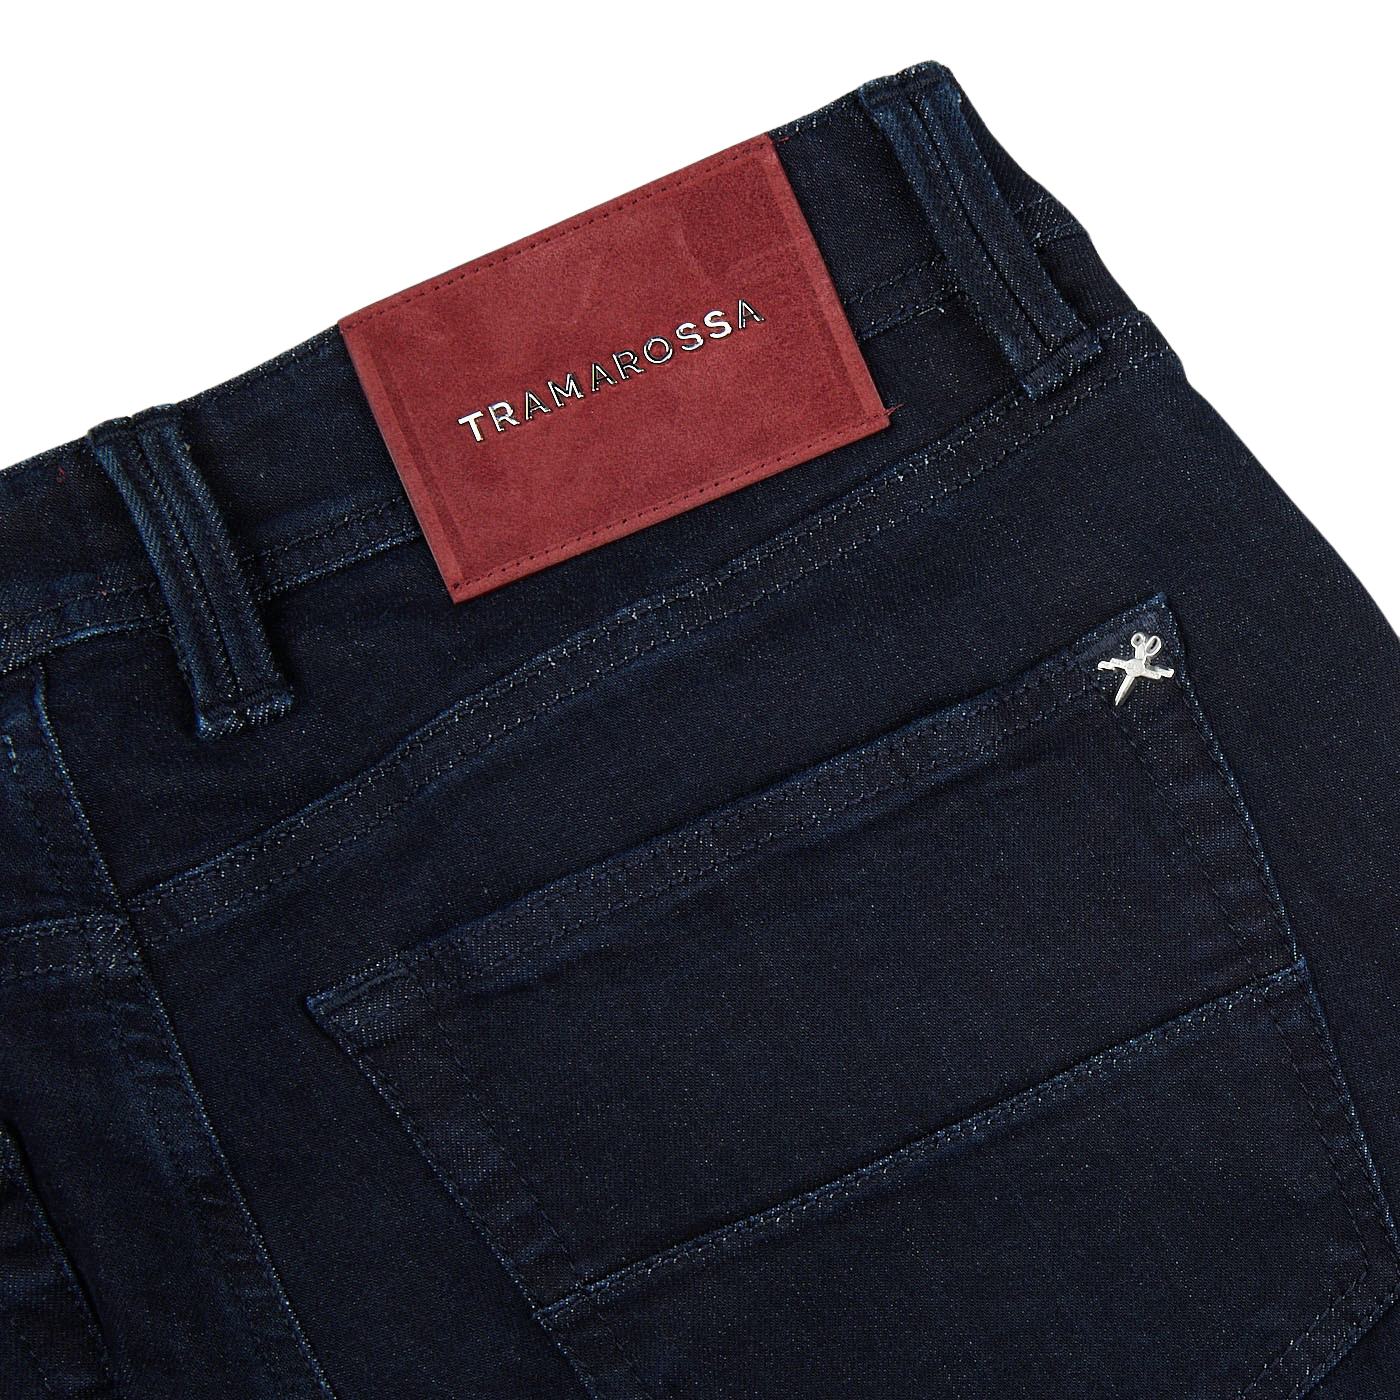 A pair of Raw Blue Super Stretch Michelangelo jeans from Tramarossa with a slim fit and a red label on the back.